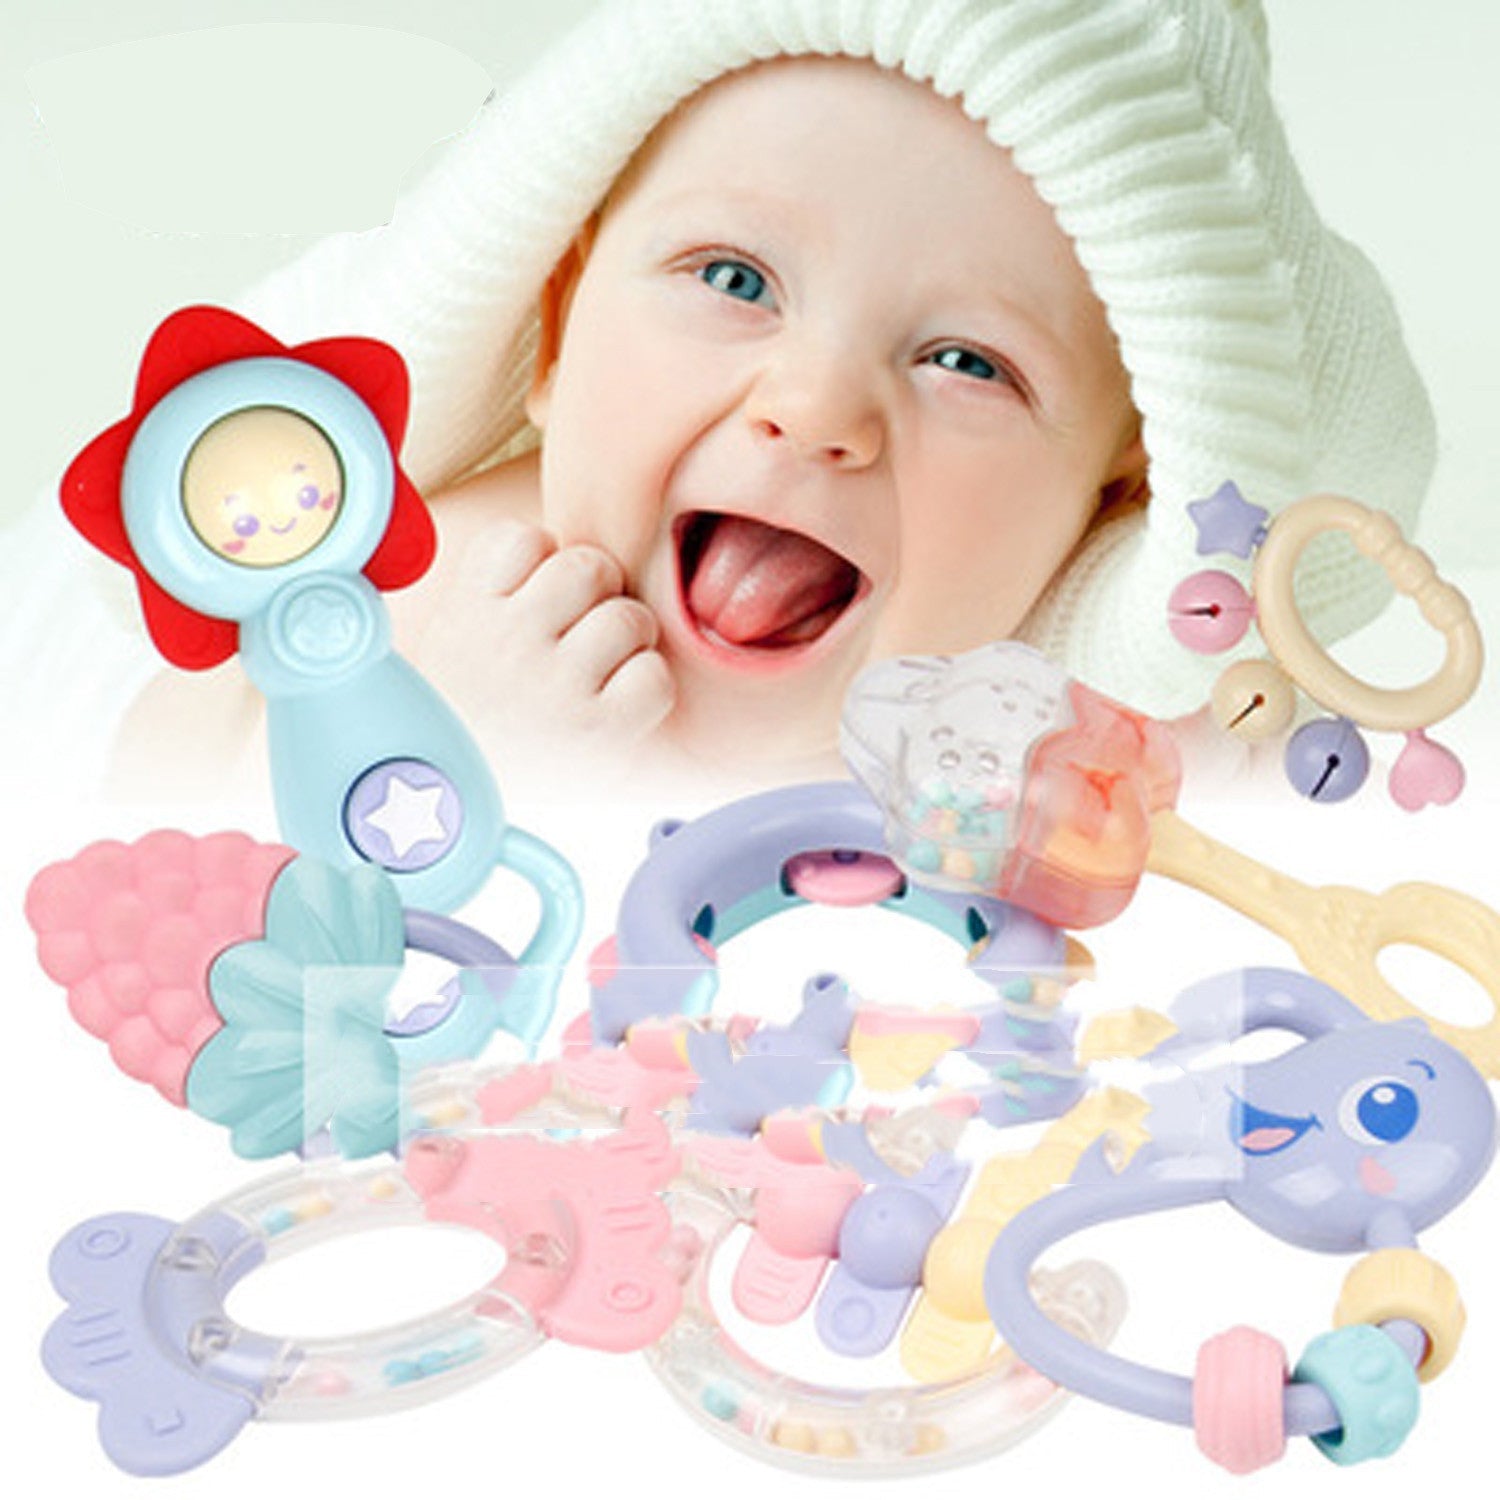 Baby teething toy set - Adorable Attire